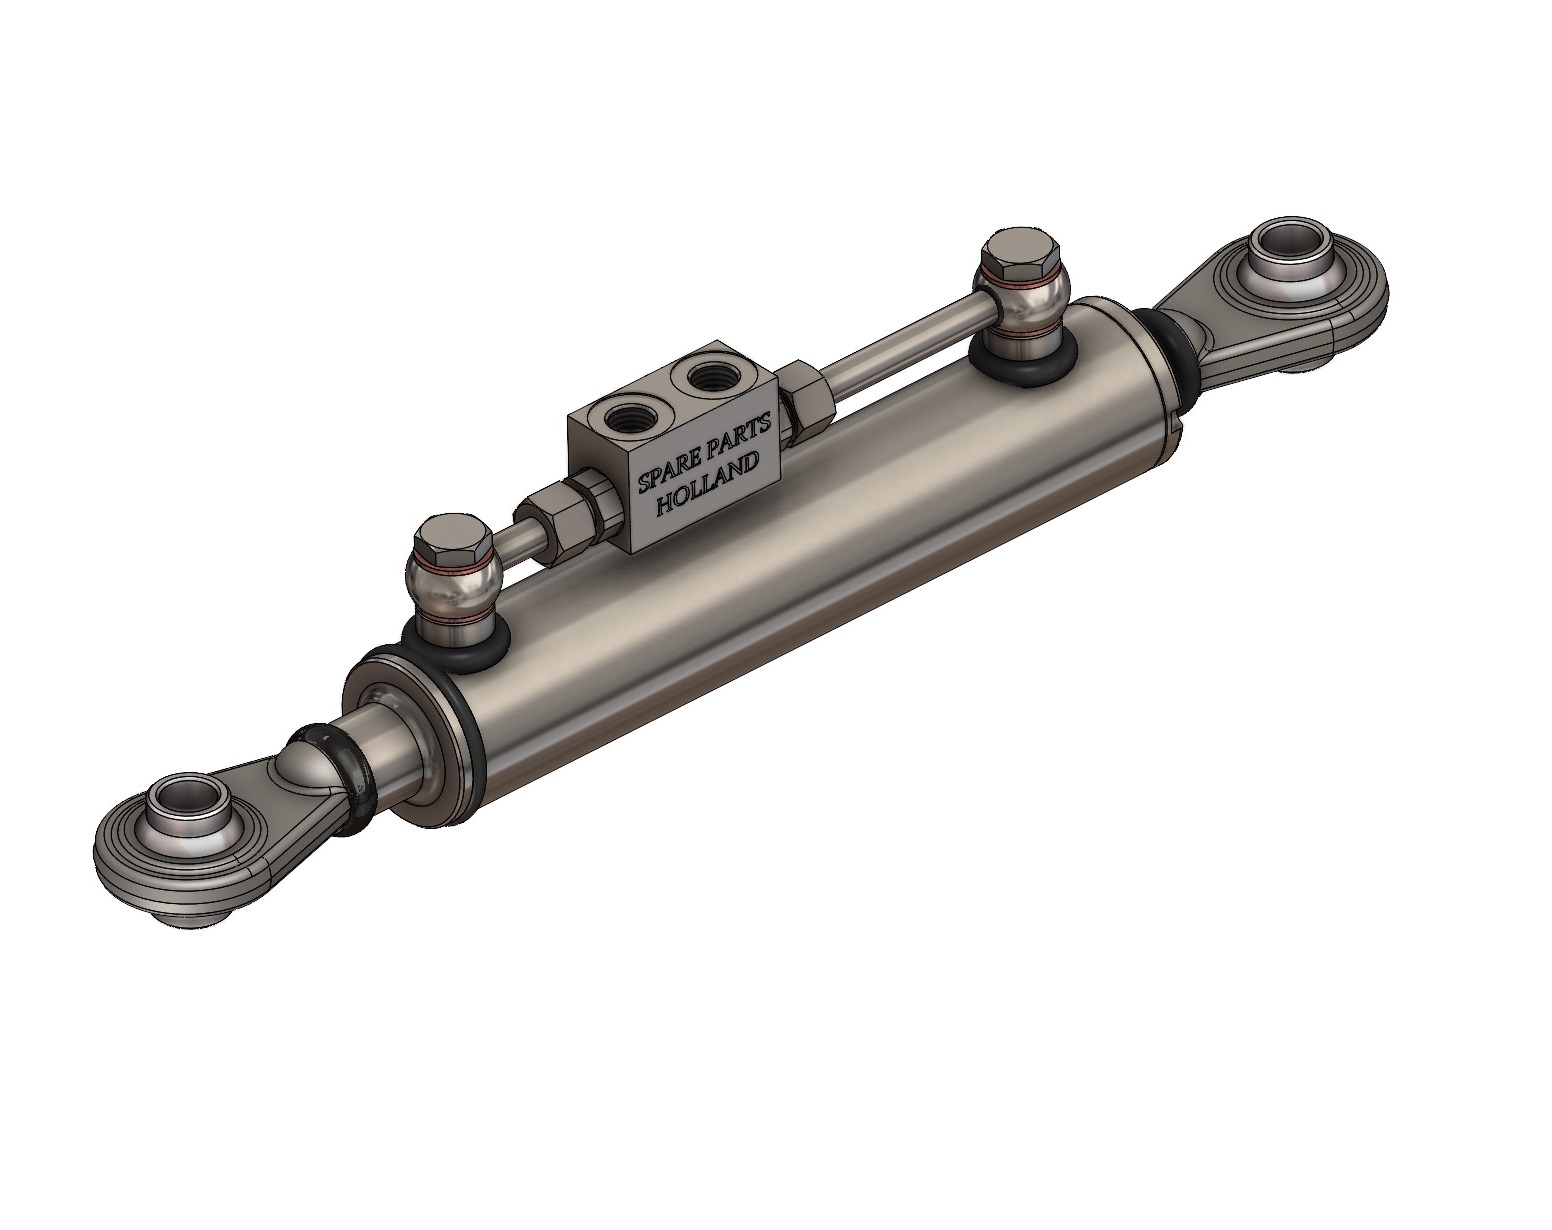 Hydraulic Top Link Cat. 1-1 – Extended – (17 3/8” – 23 5/8”) with Locking Block and 2 x Hoses